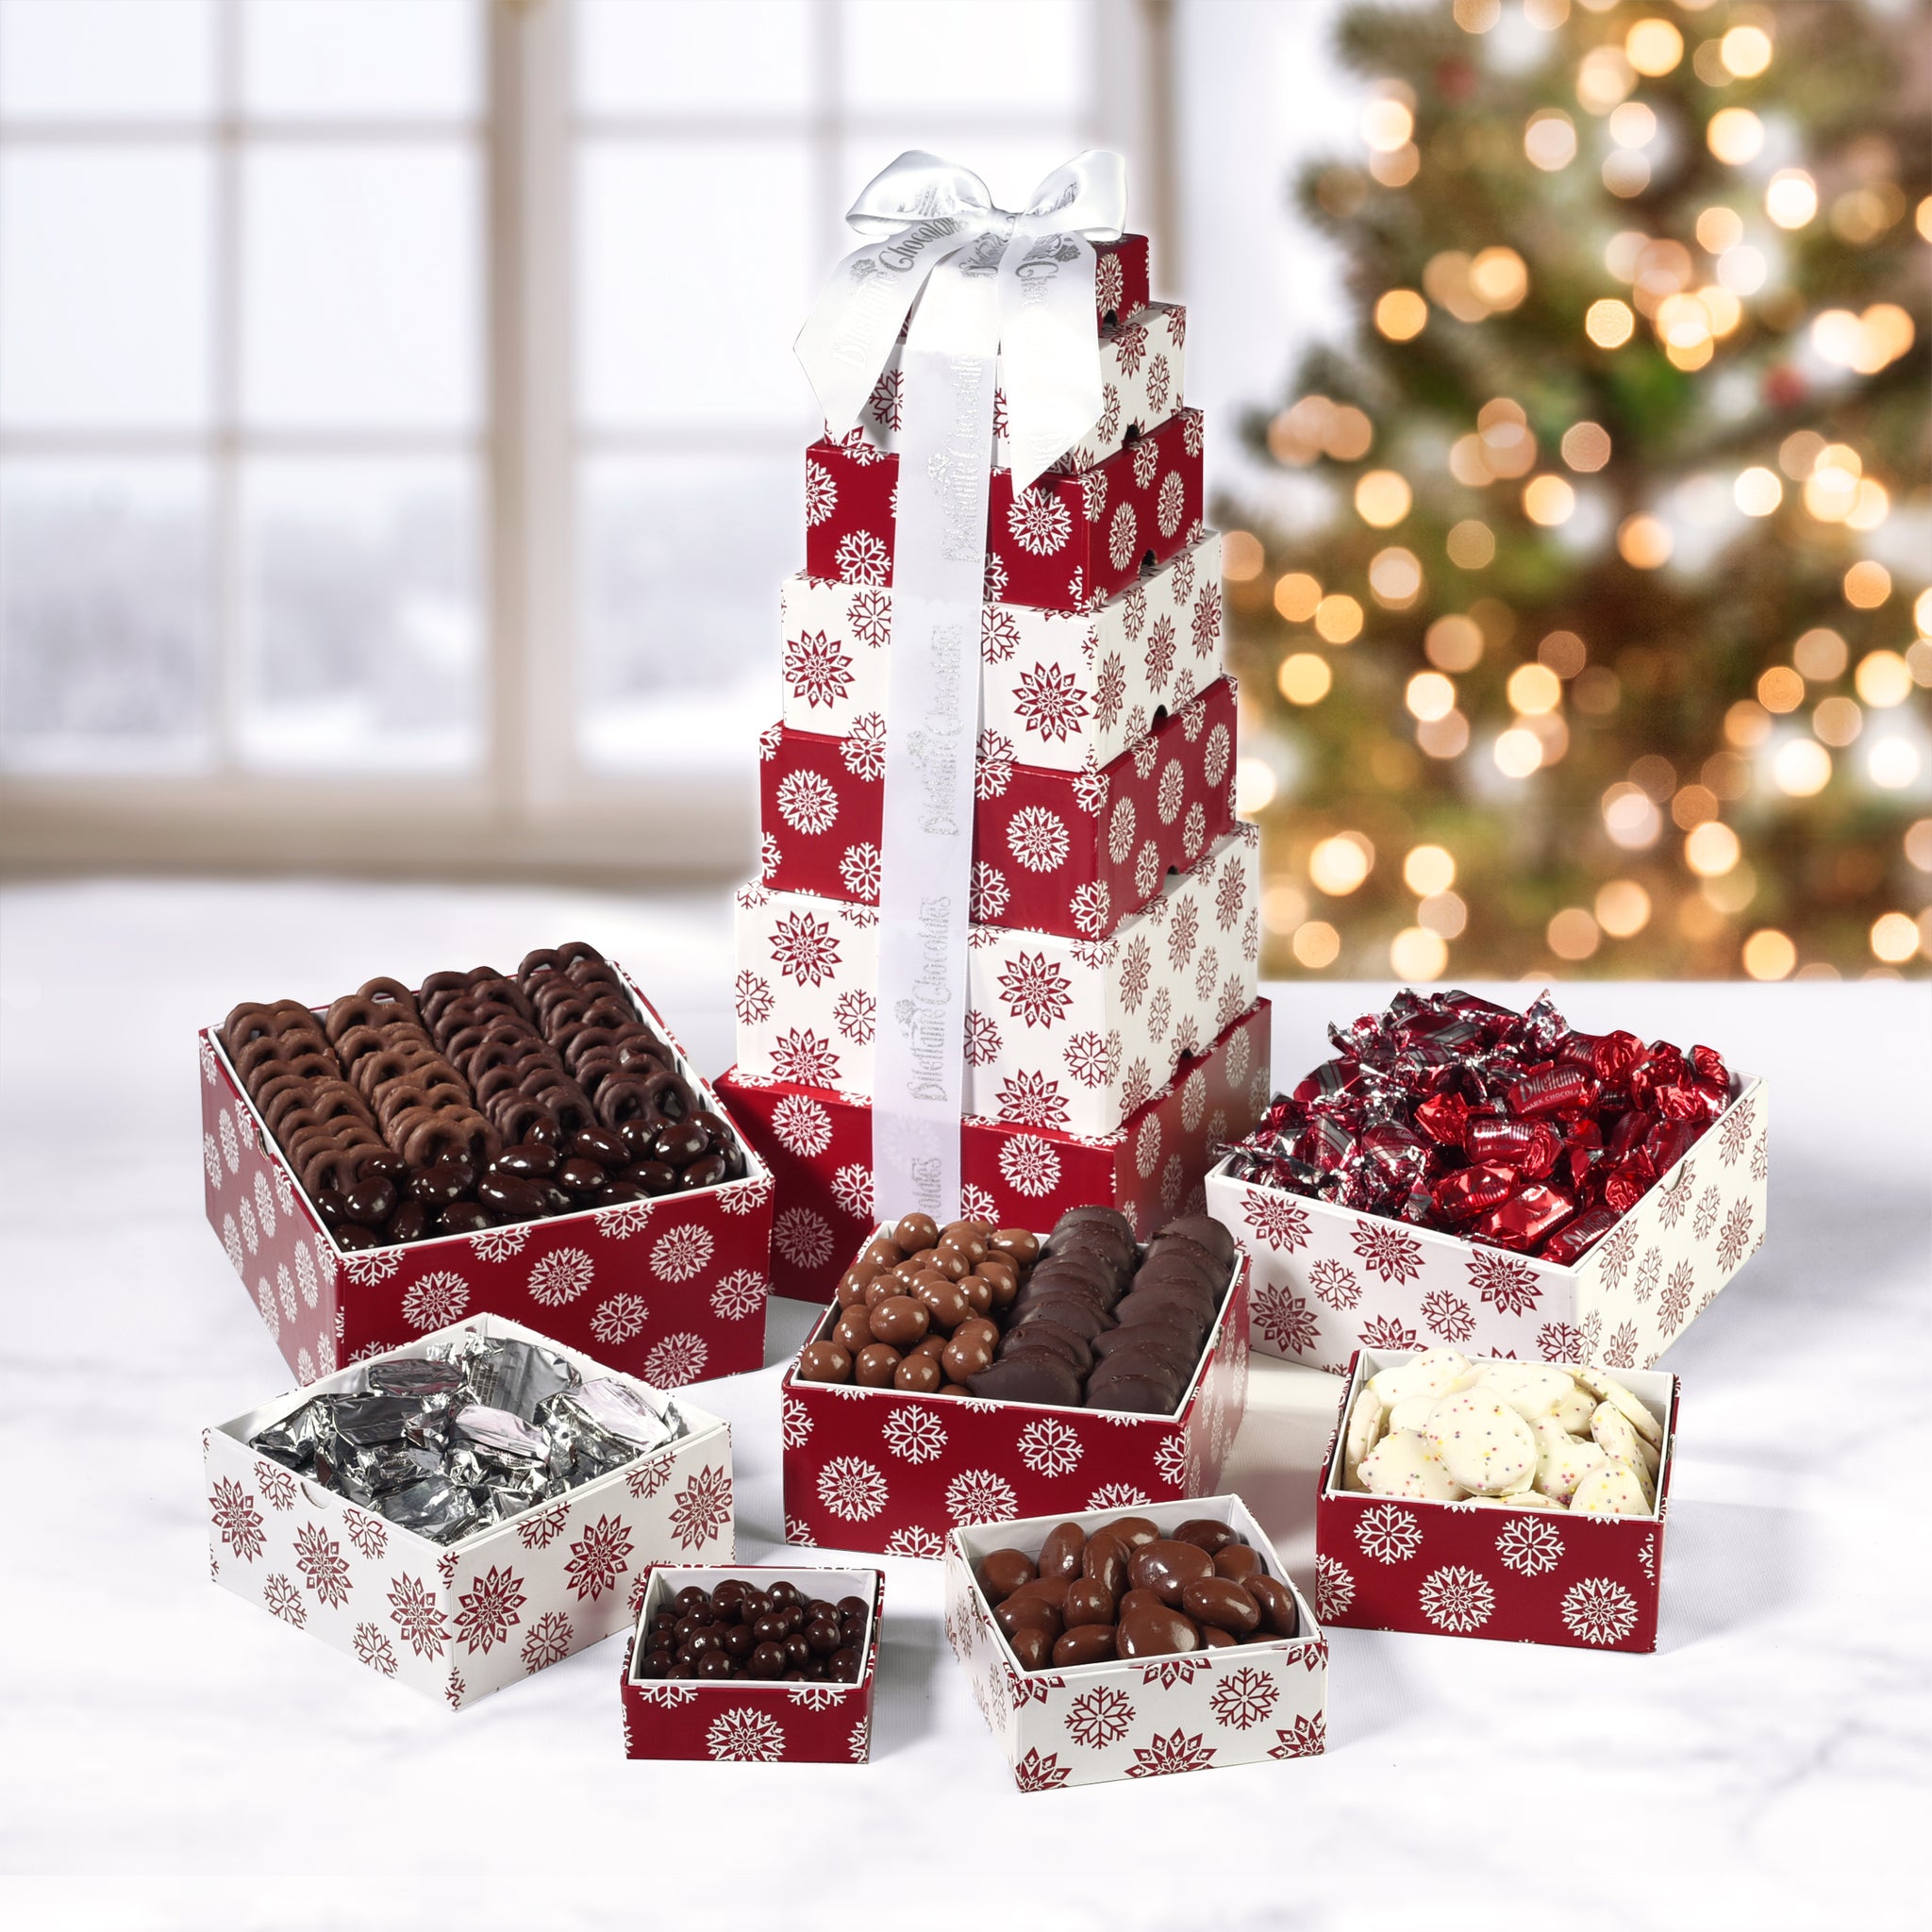 Gift of Chocolate Tower - Dilettante Chocolates